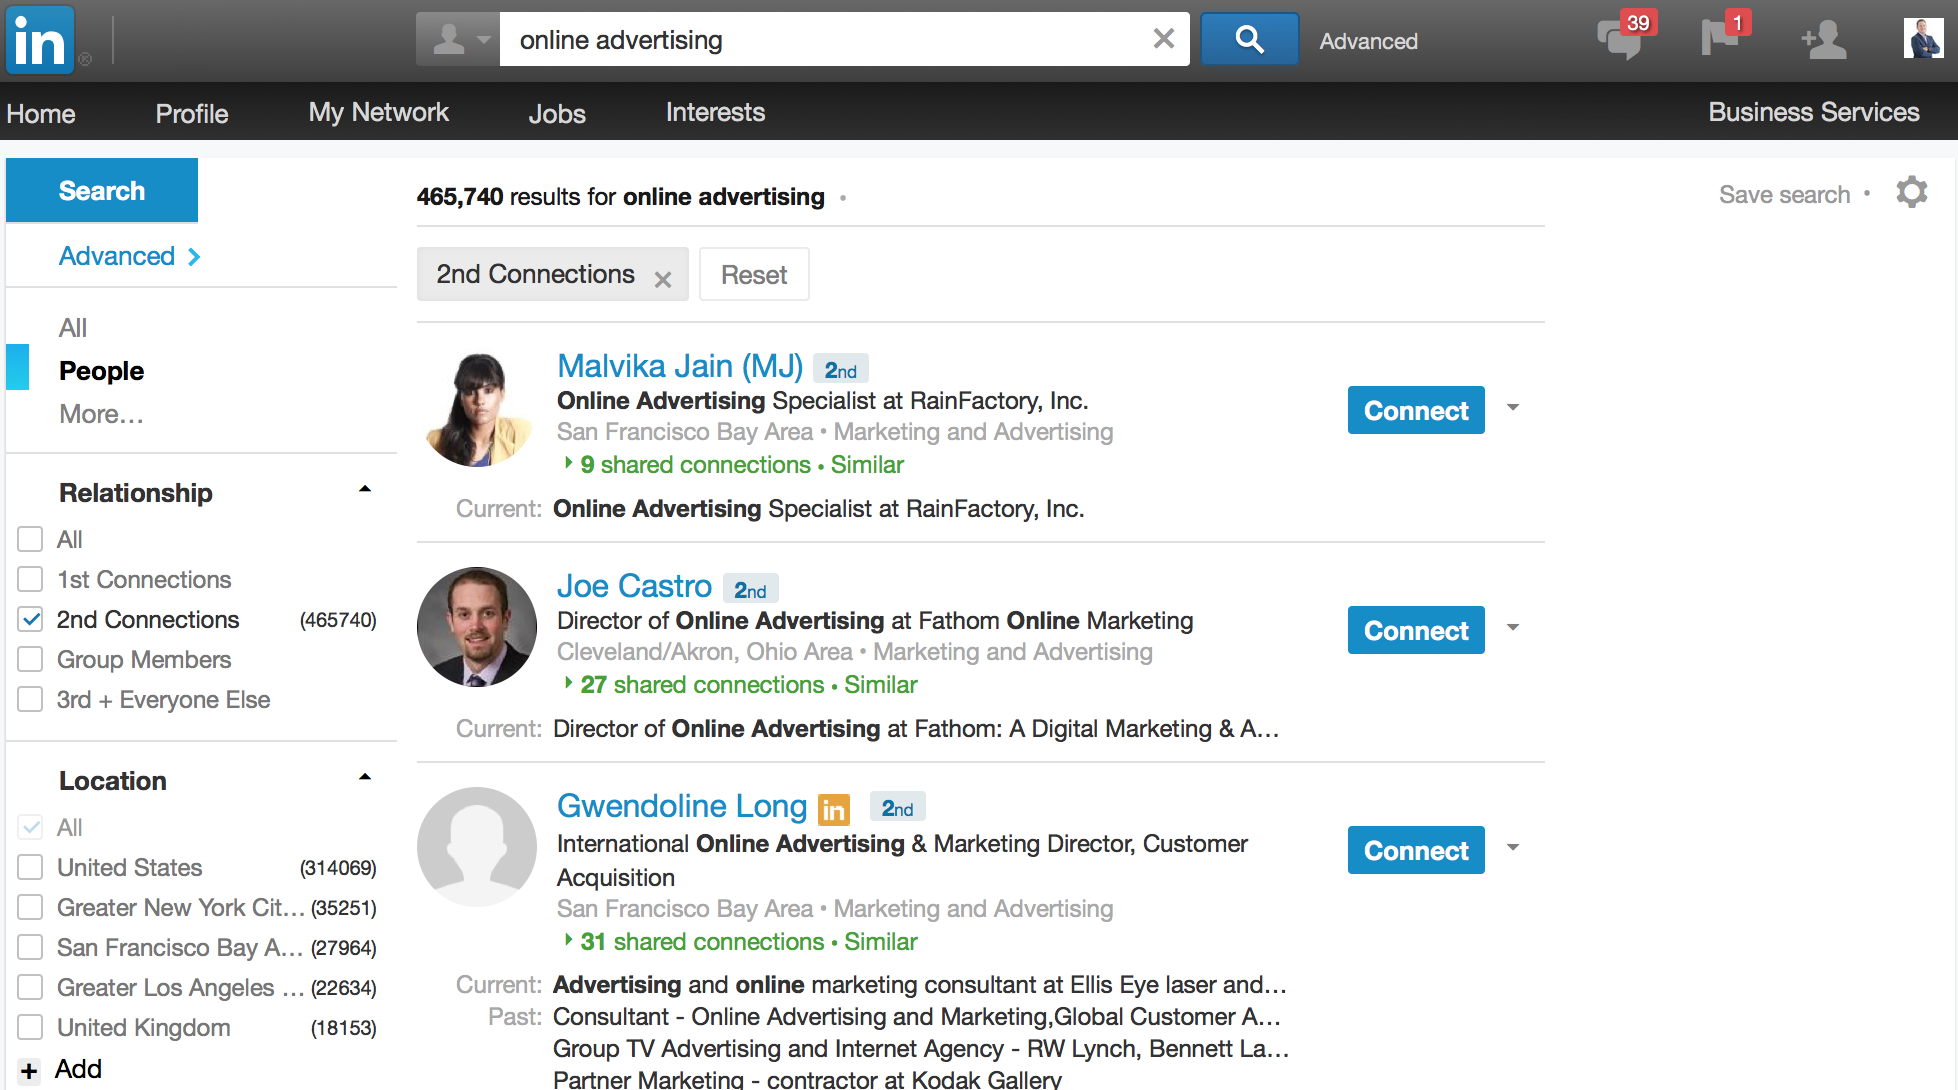 How to Get More LinkedIn Sales Leads in 5 Simple Steps